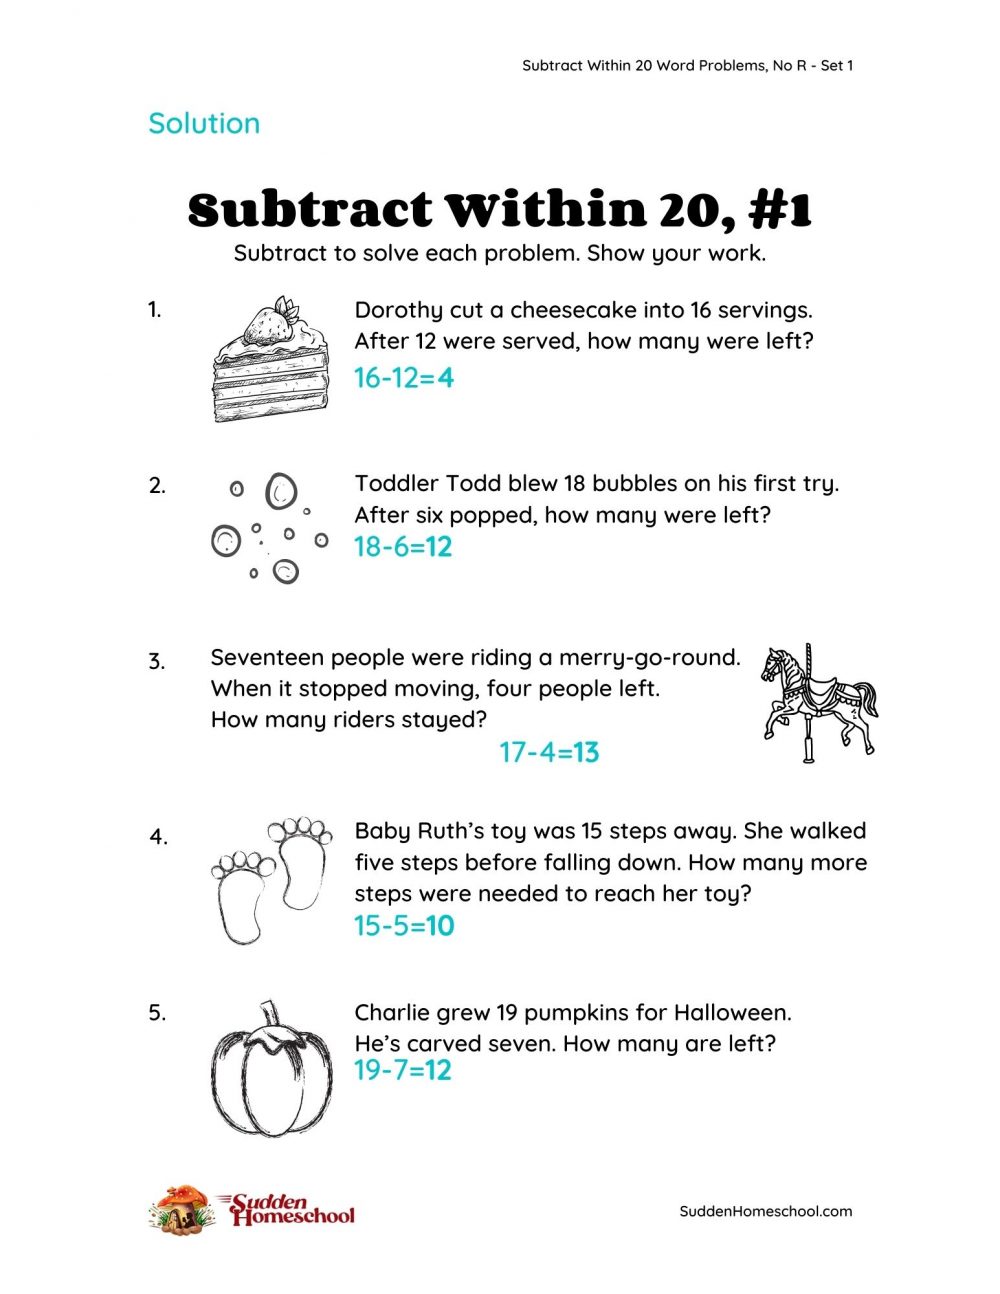 subtraction-word-problems-subtract-within-20